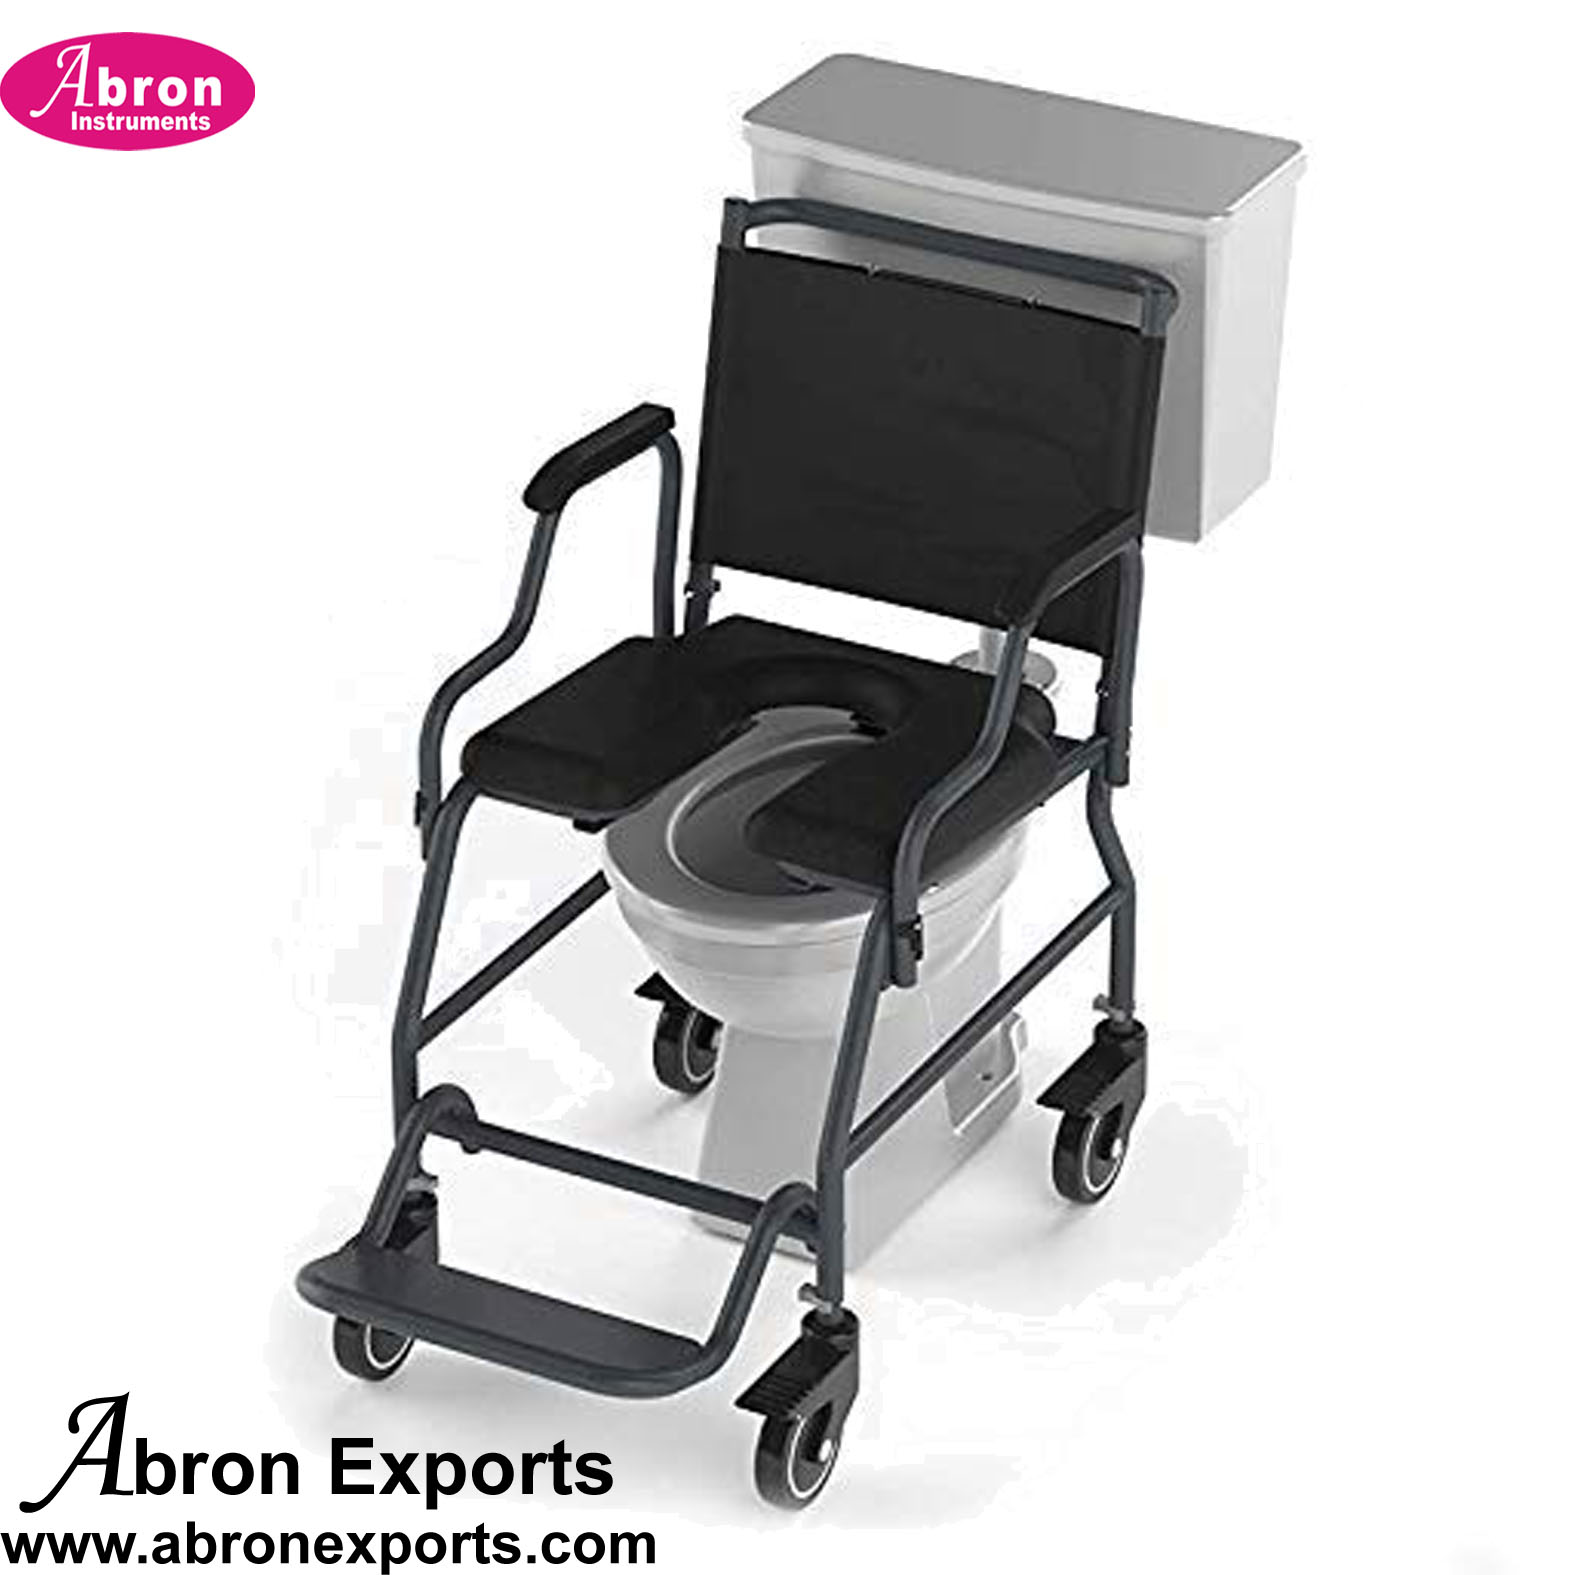 Wheel chair commode with removable armrests locking caster capacity 150kg folding for adult abron ABM-2362CM 